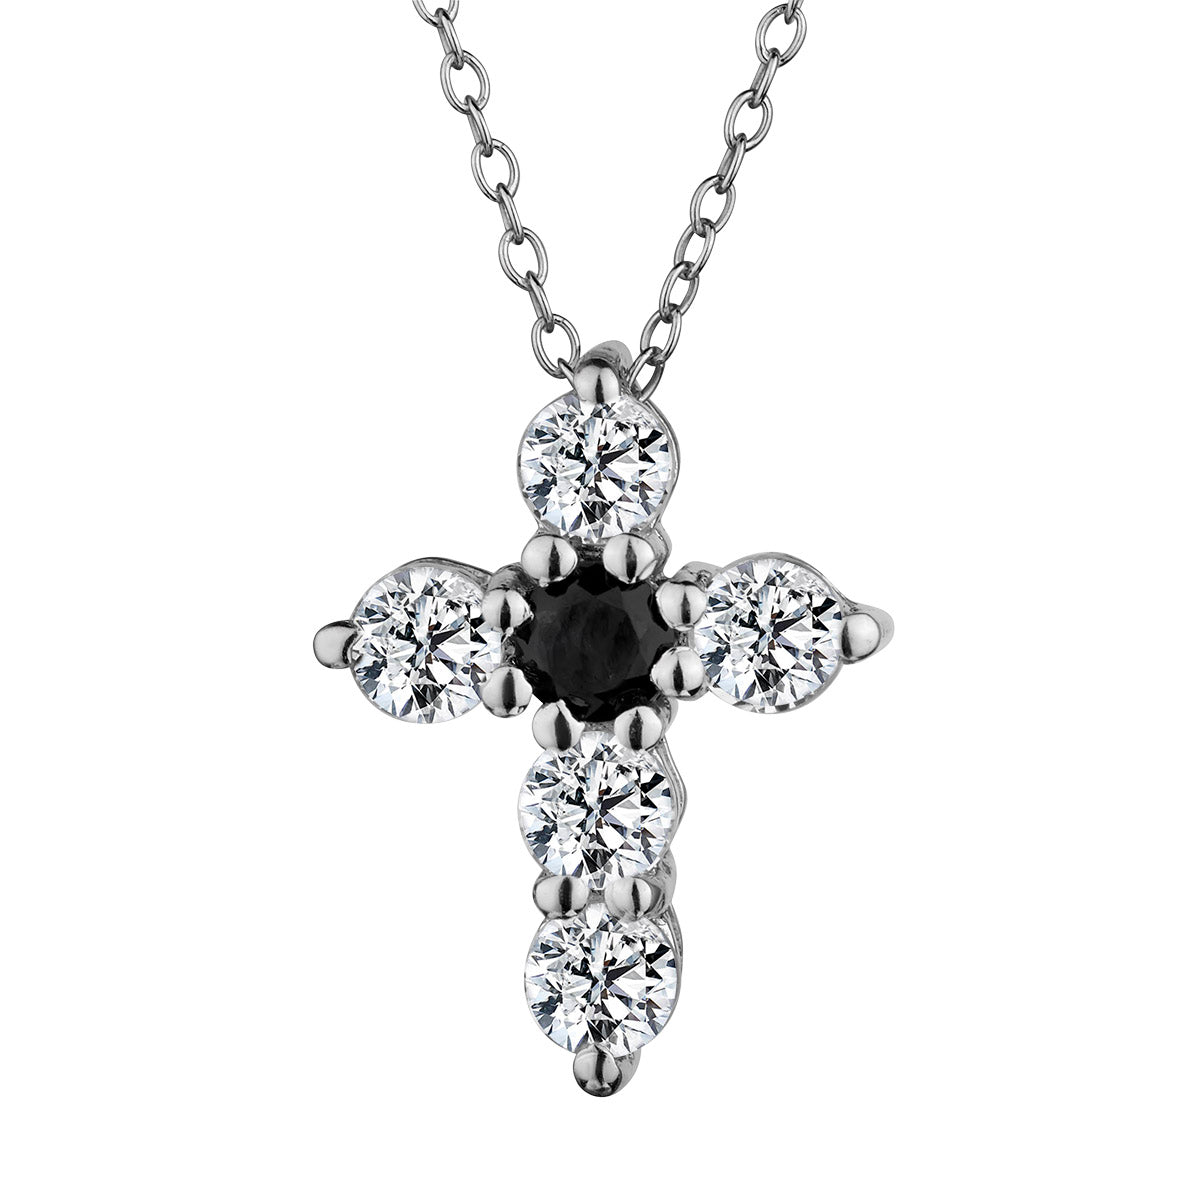 Genuine Black Sapphire & White Topaz Cross Pendant,  Sterling Silver. Necklaces and Pendants. Griffin Jewellery Designs. 